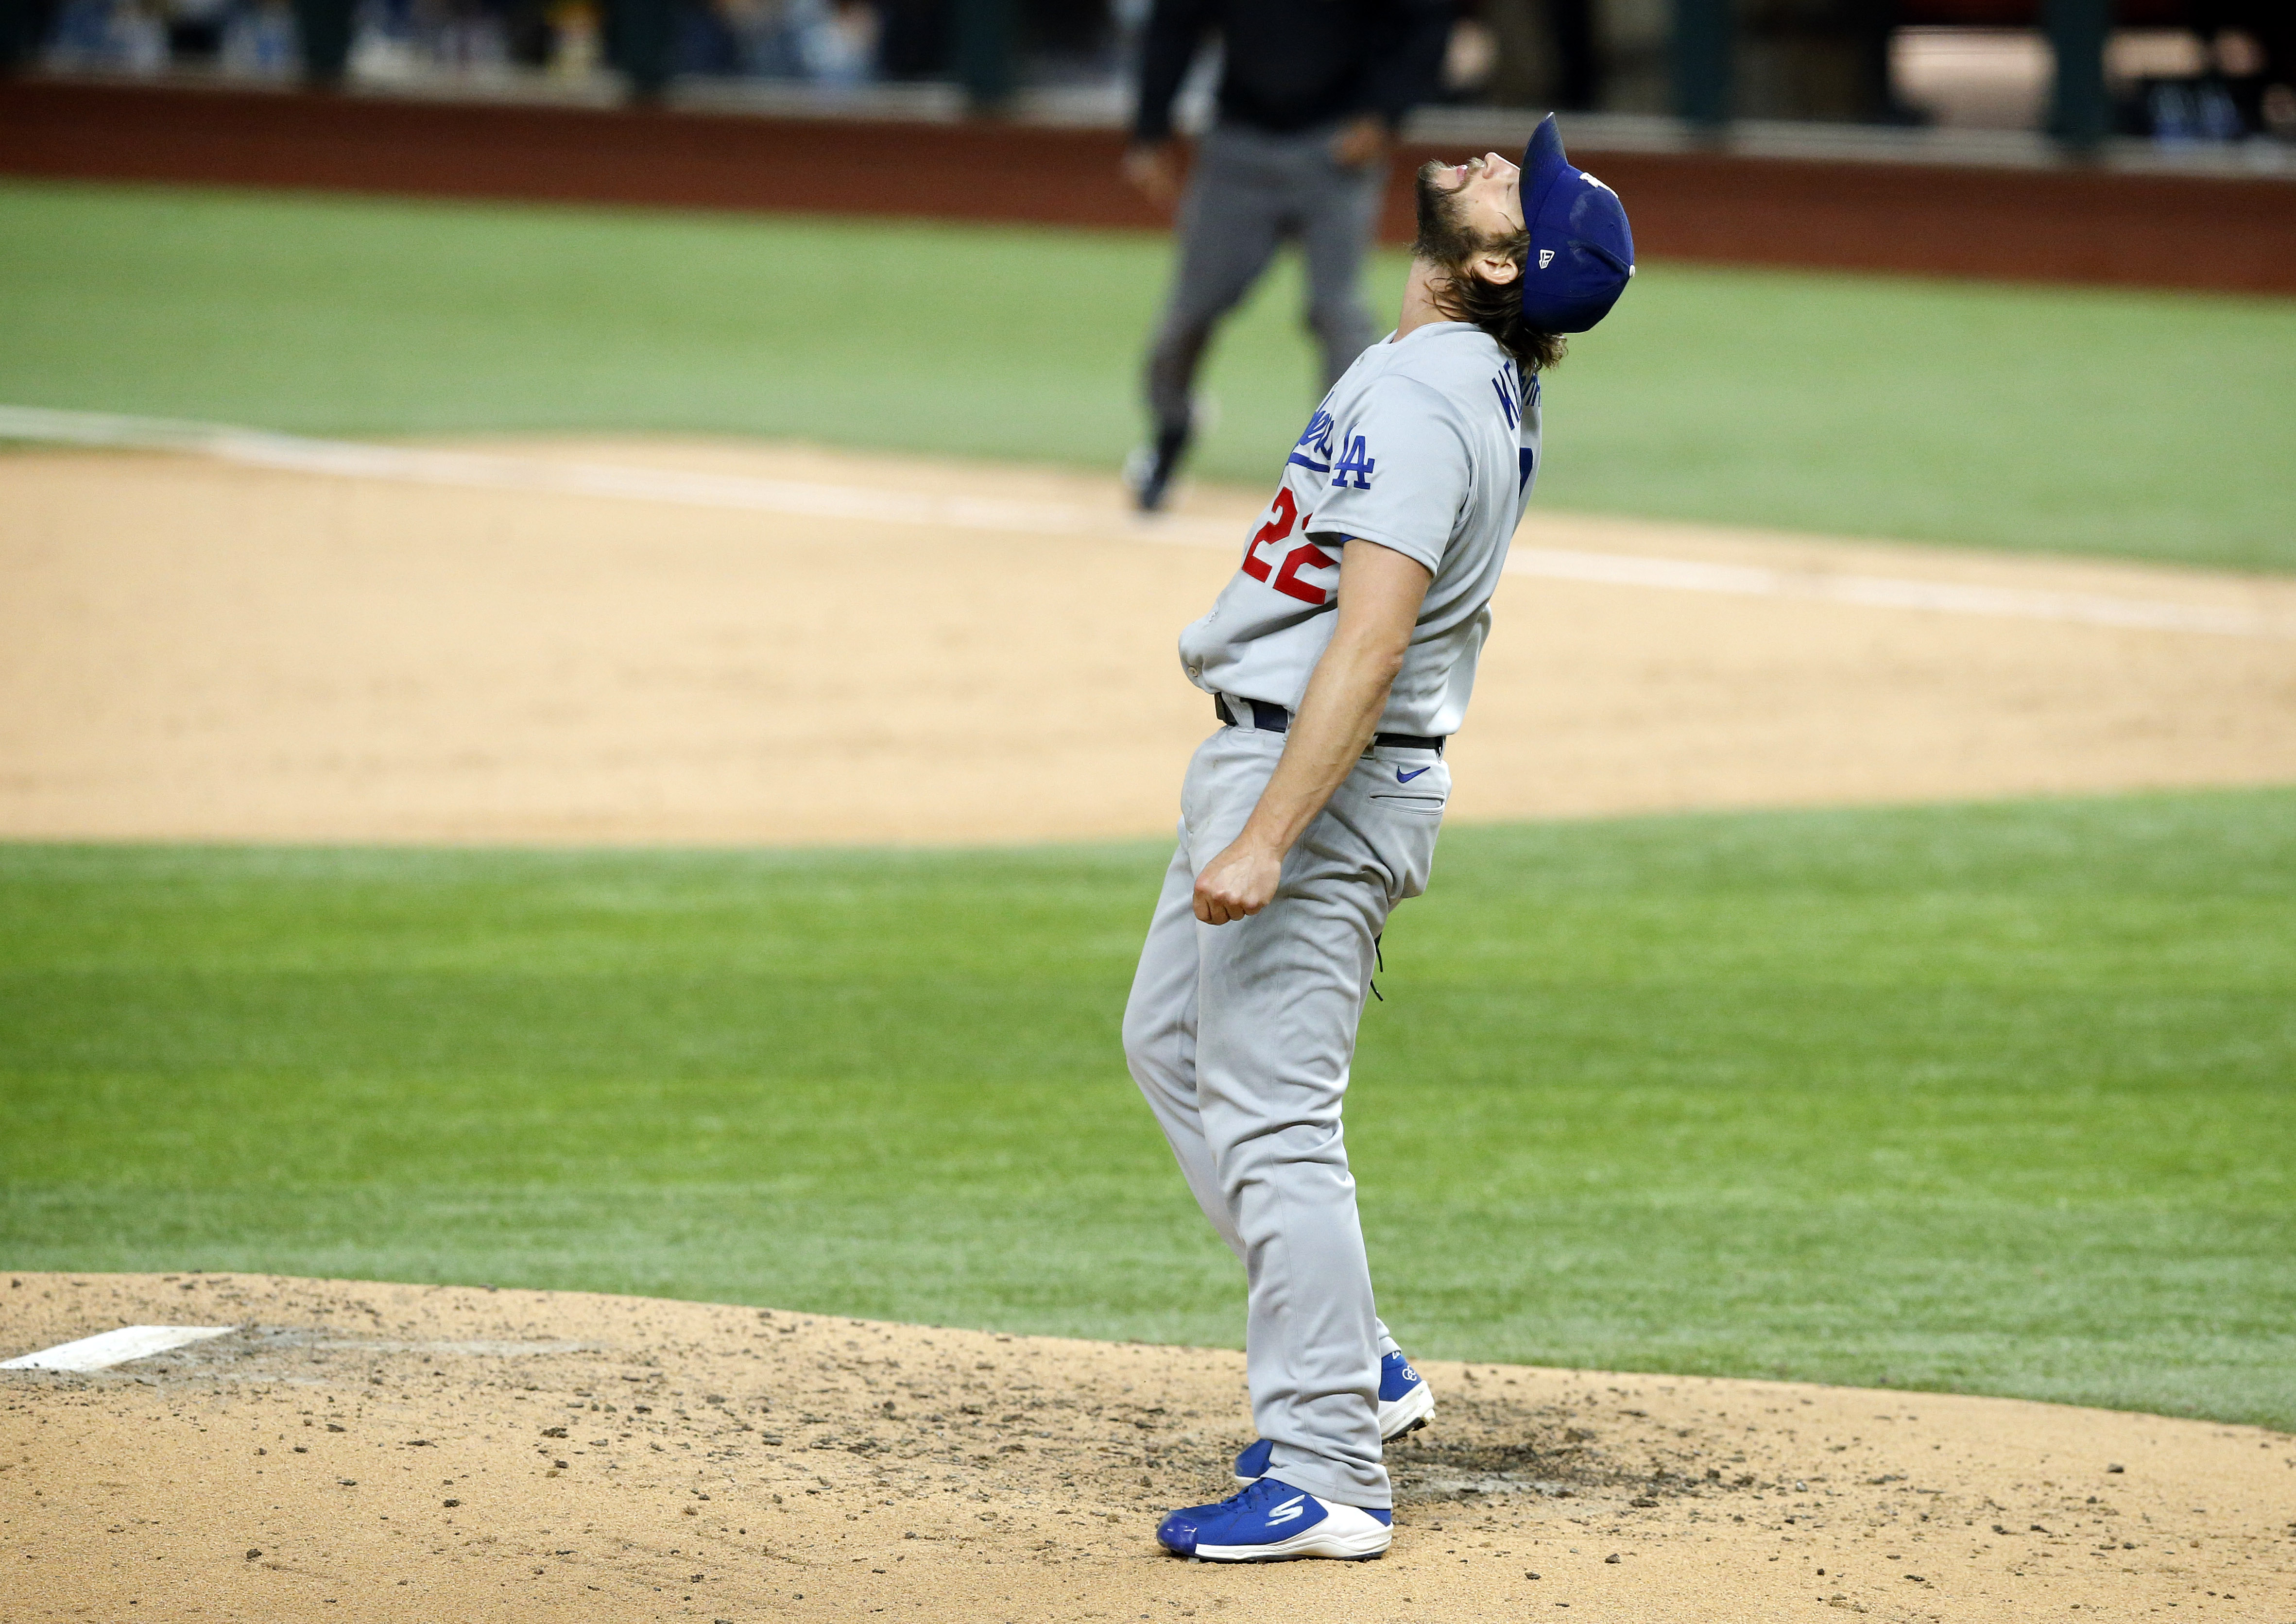 Dodgers beat Mets in Game 4 behind Clayton Kershaw, force deciding